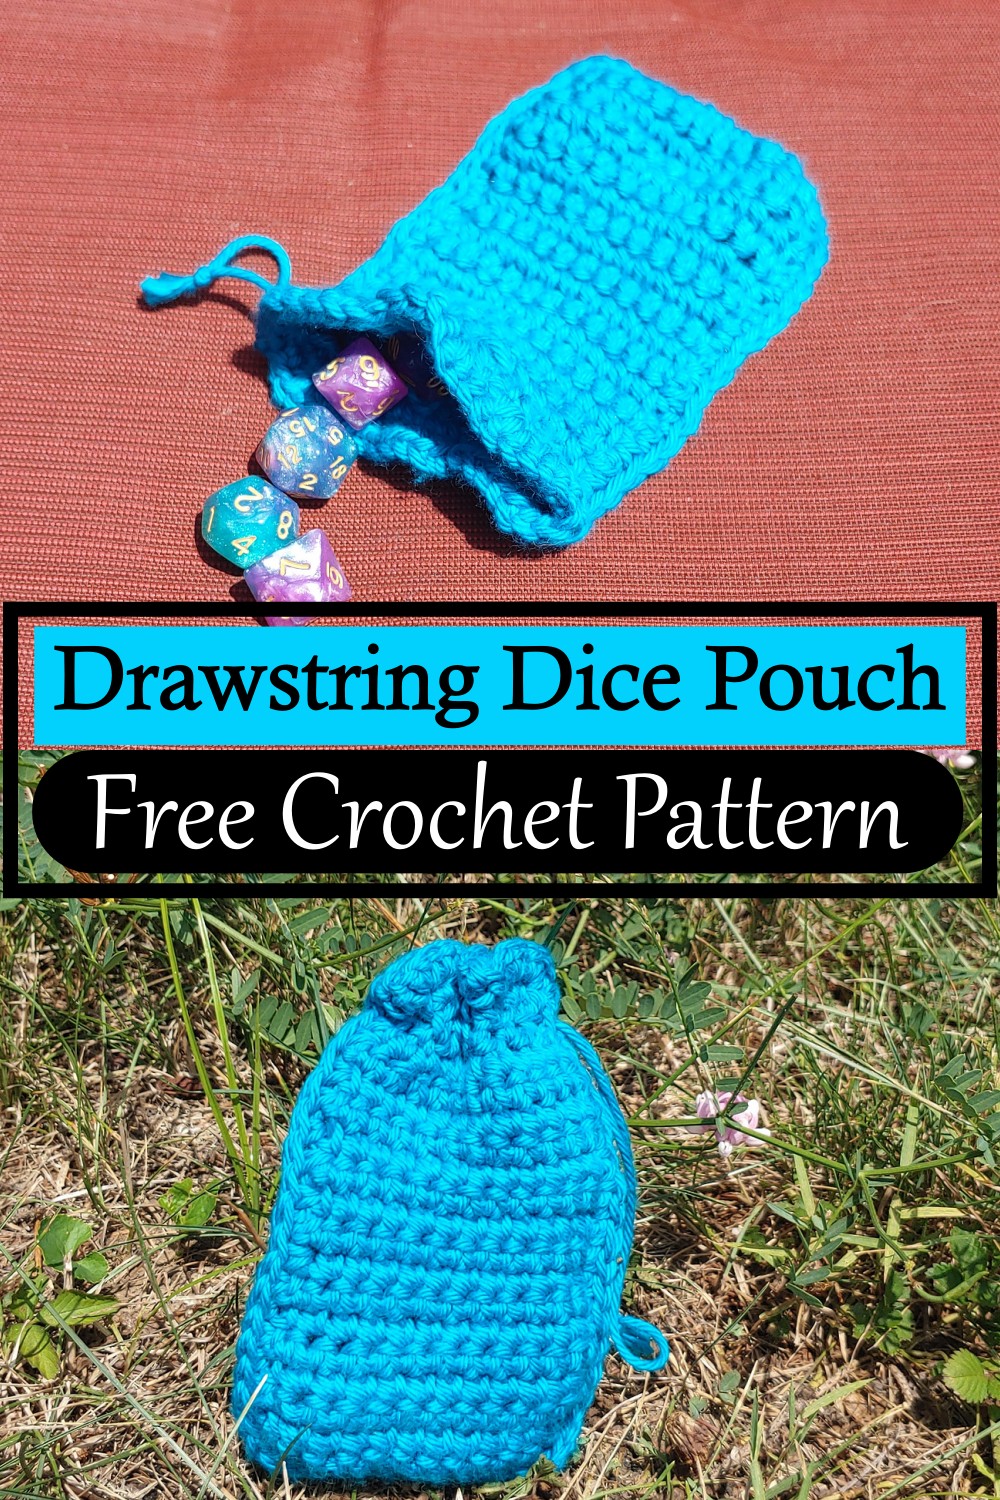 Drawstring Dice Pouch